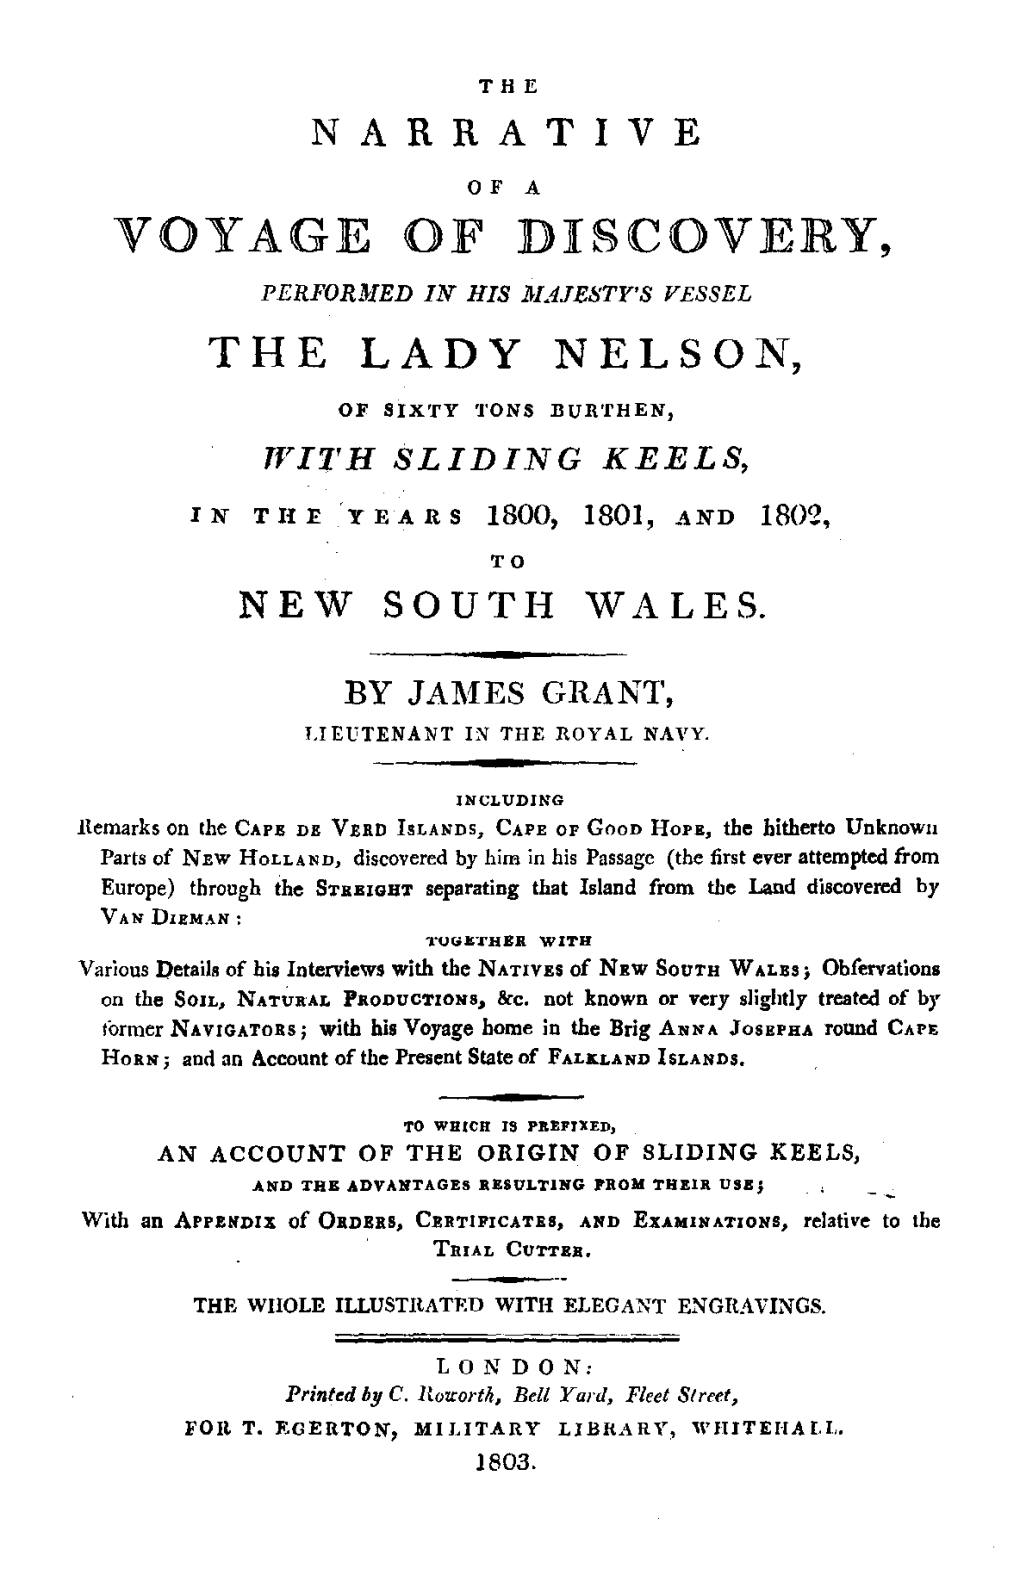 The Narrative of a Voyage of Discovery Performed in His Majesty's Vessel the Lady Nelson... to New South Wales. London: Rowo